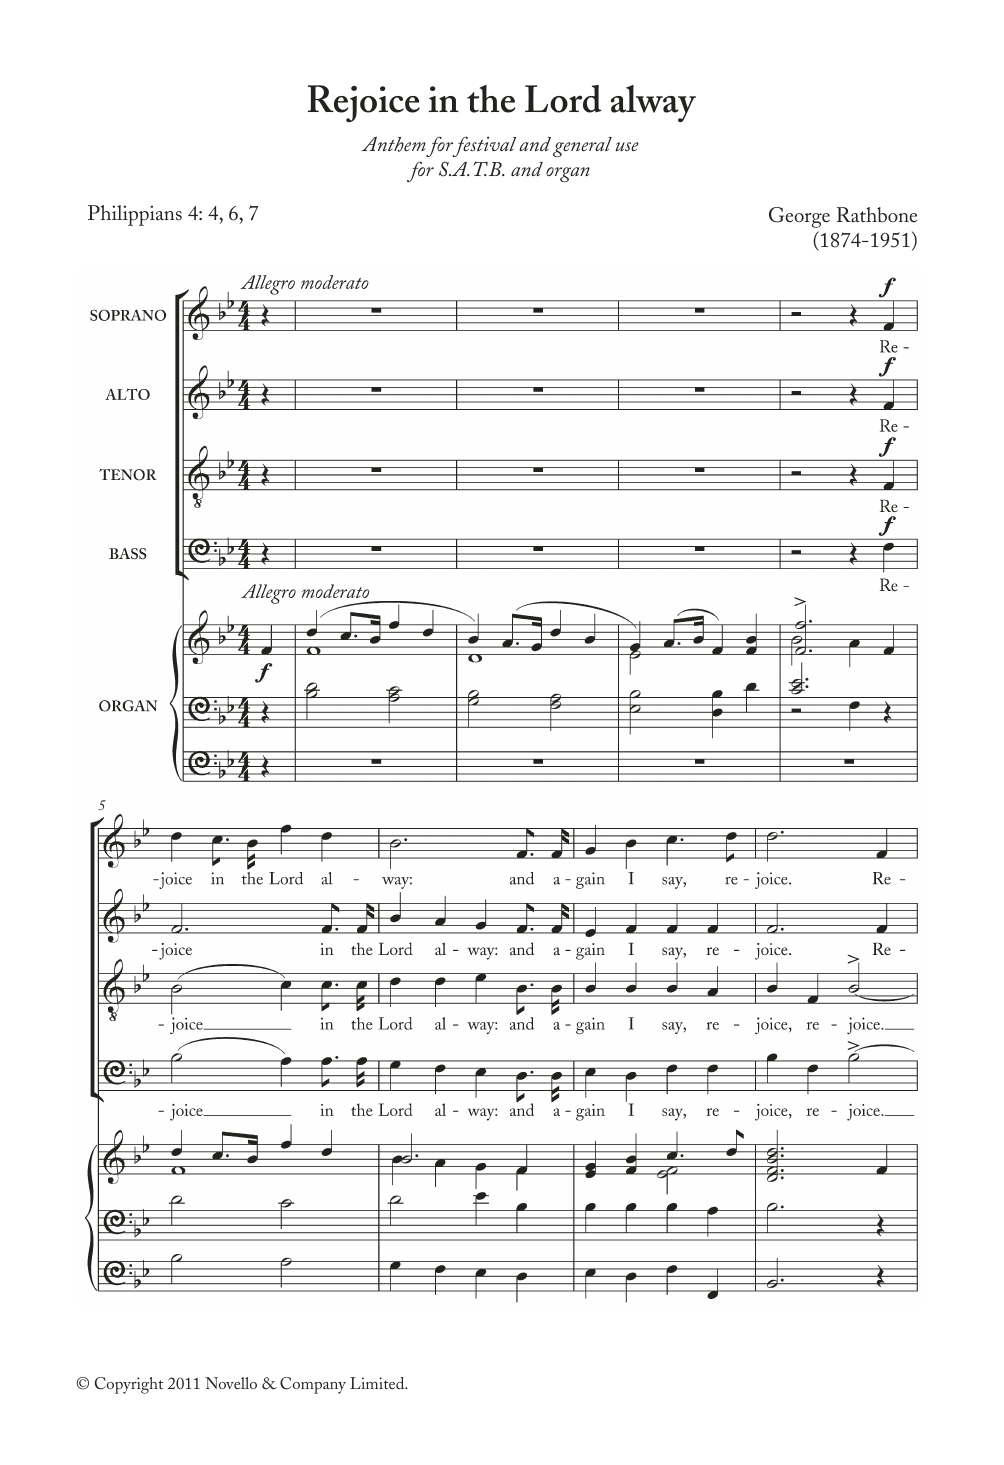 Download George Rathbone Rejoice In The Lord Alway Sheet Music